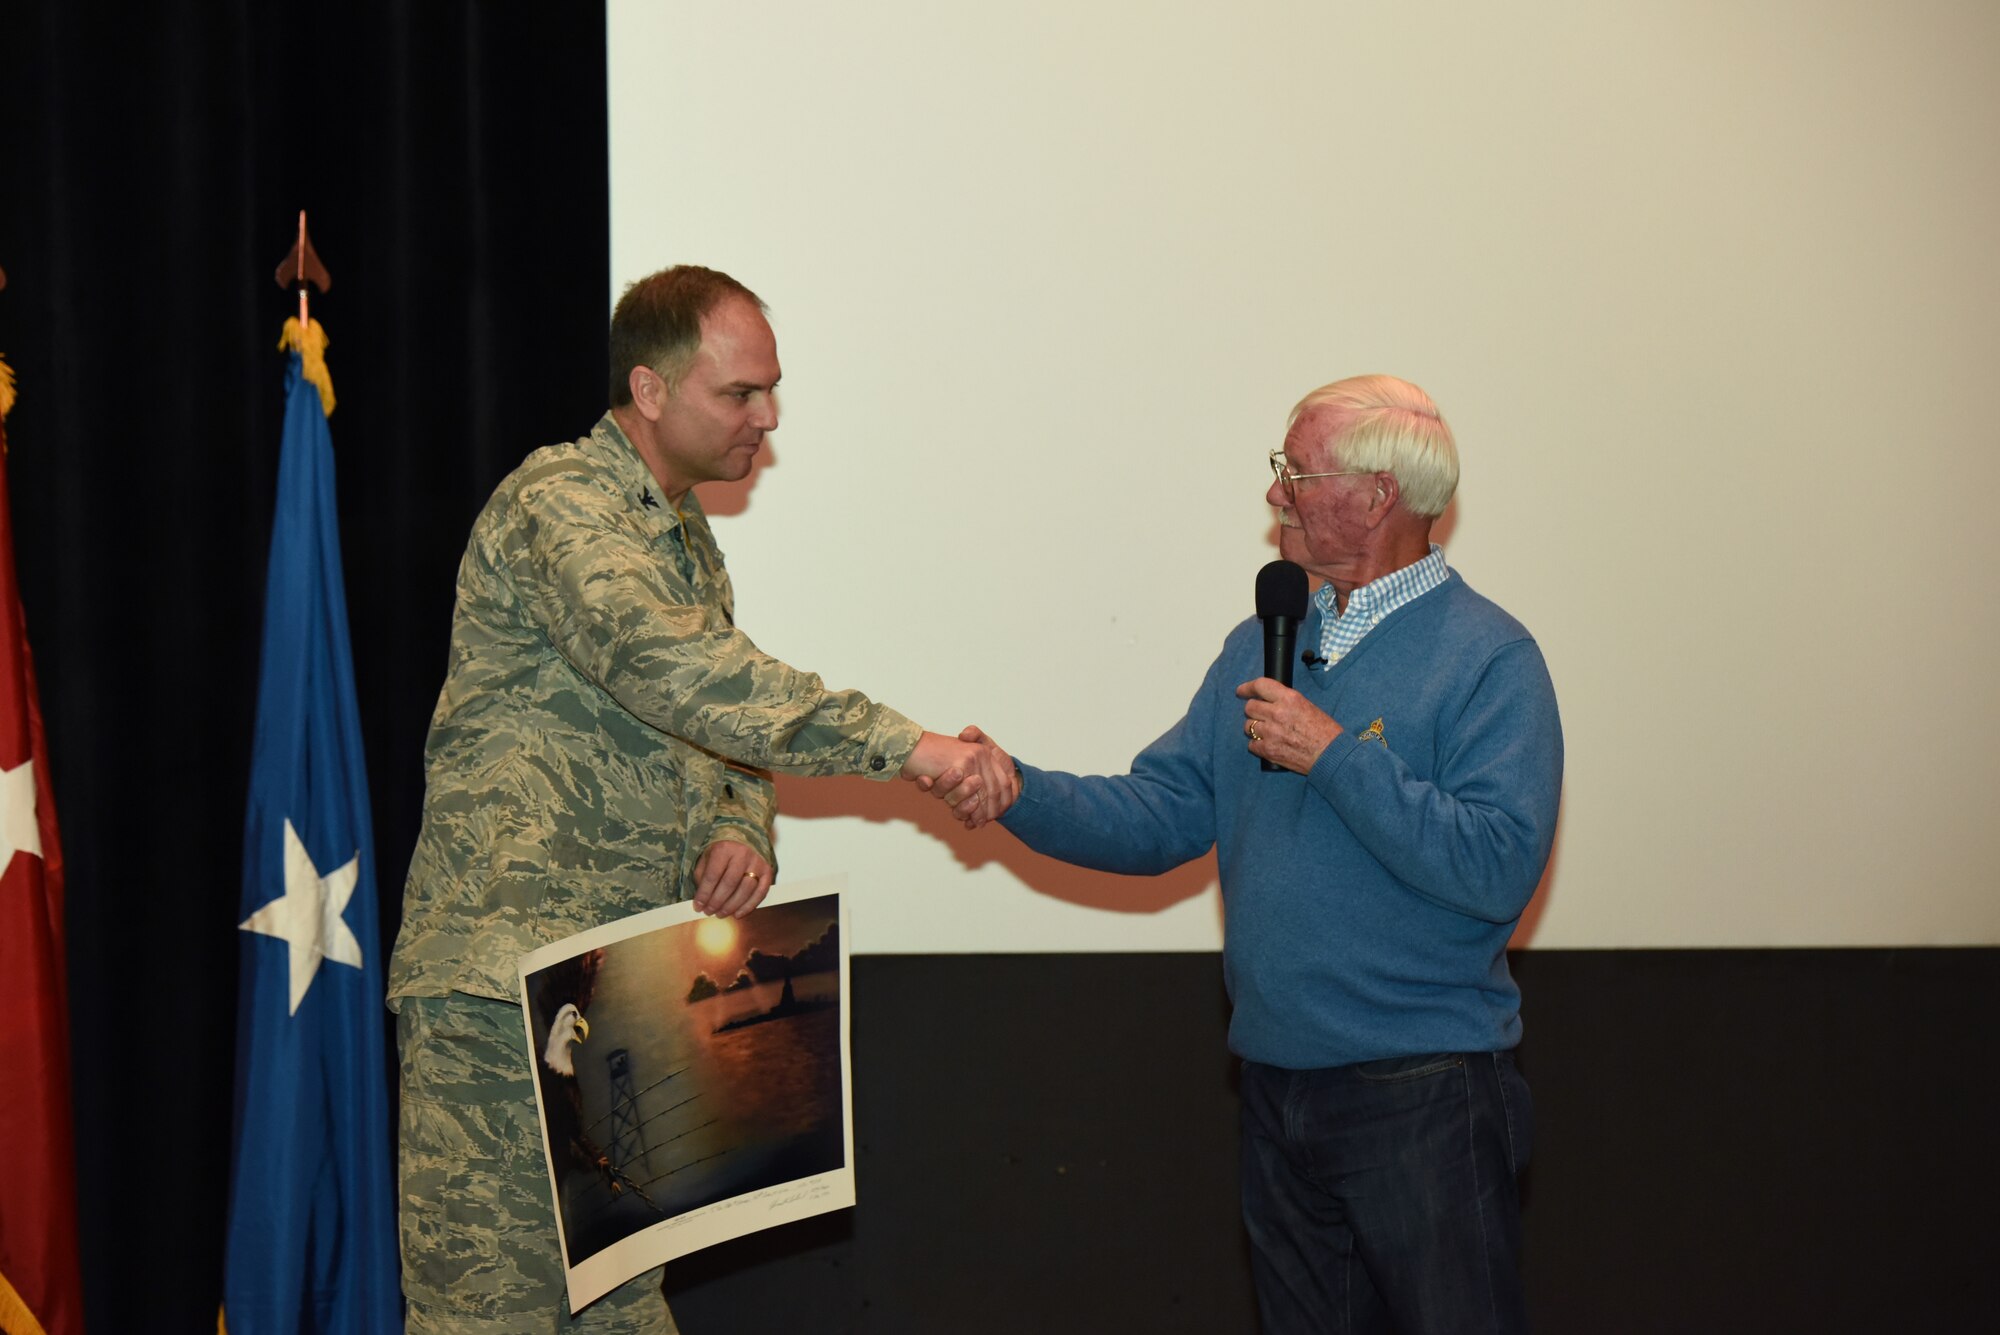 Retired U. S. Air Force Col. Ed Hubbard presents a limited edition lithograph that he painted in the early 1980s to 153rd Airlift Wing Commander Col. Bradley Swanson. Hubbard detailed his experiences as a POW and provided insight on keeping a positive attitude during captivity. (U.S. Air National Guard photo by Tech. Sgt. John Galvin/released)